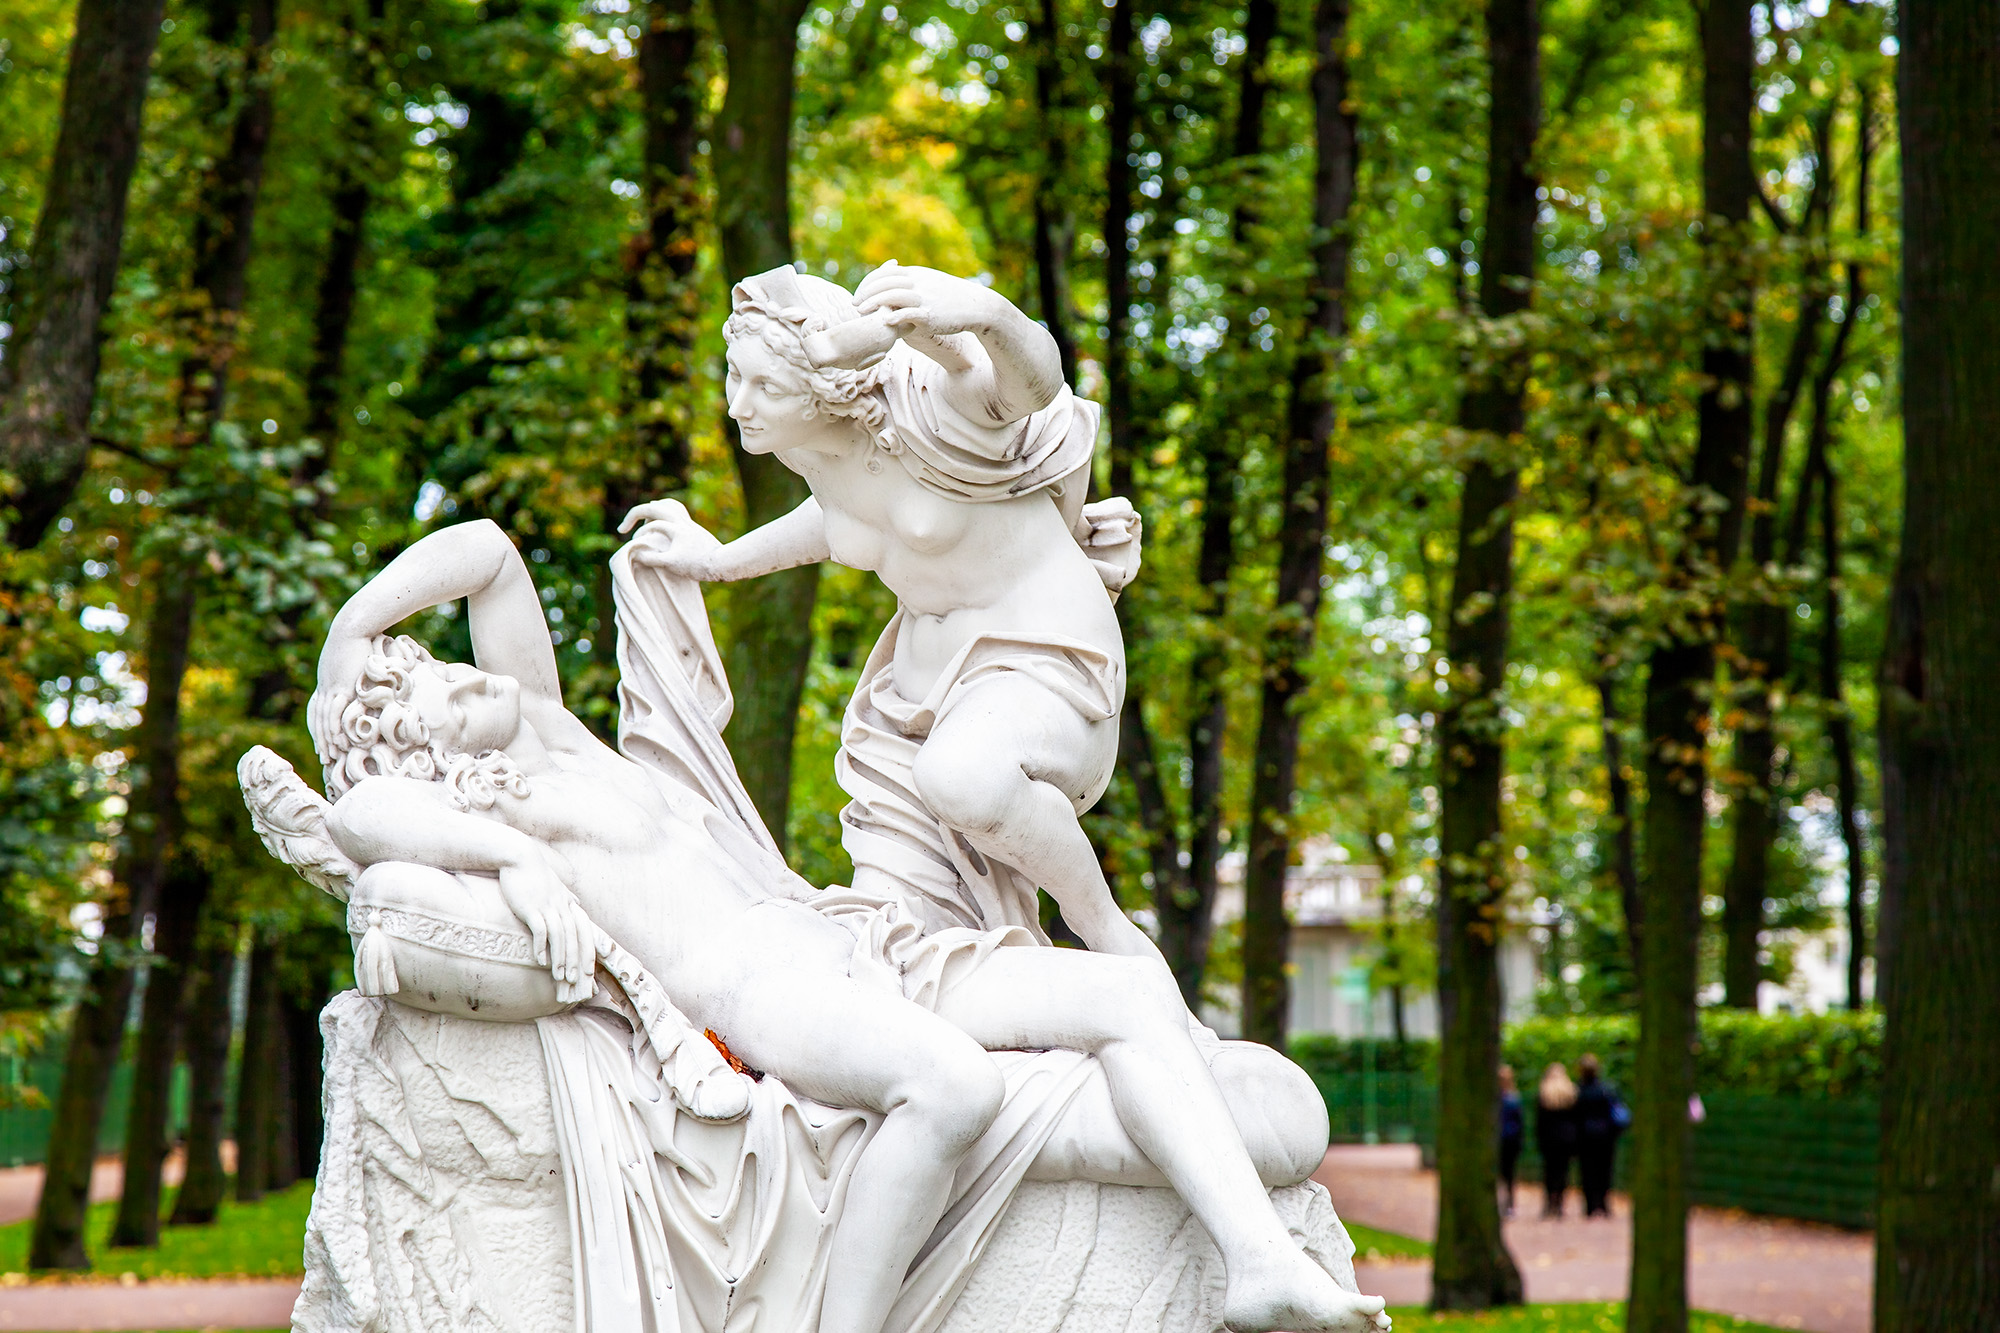 Amidst the lush greenery of St. Petersburg's Summer Garden, a late 17th-century Italian marble masterpiece, "Cupid and Psyche...